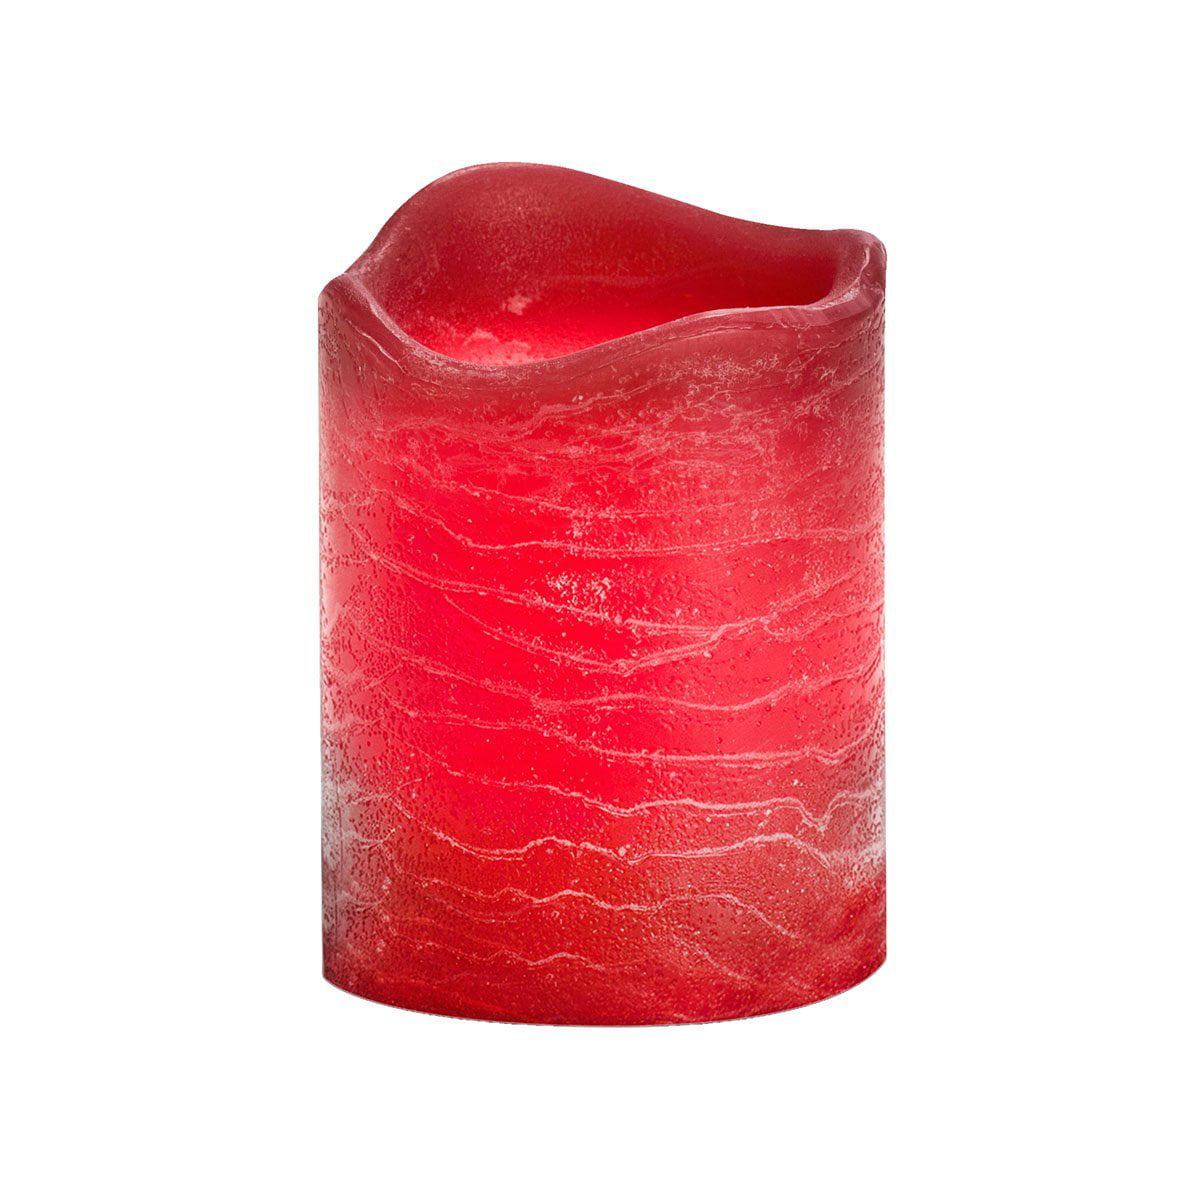 Inglow 4" Flameless Rustic Pillar Pomegranate Scented Candle 